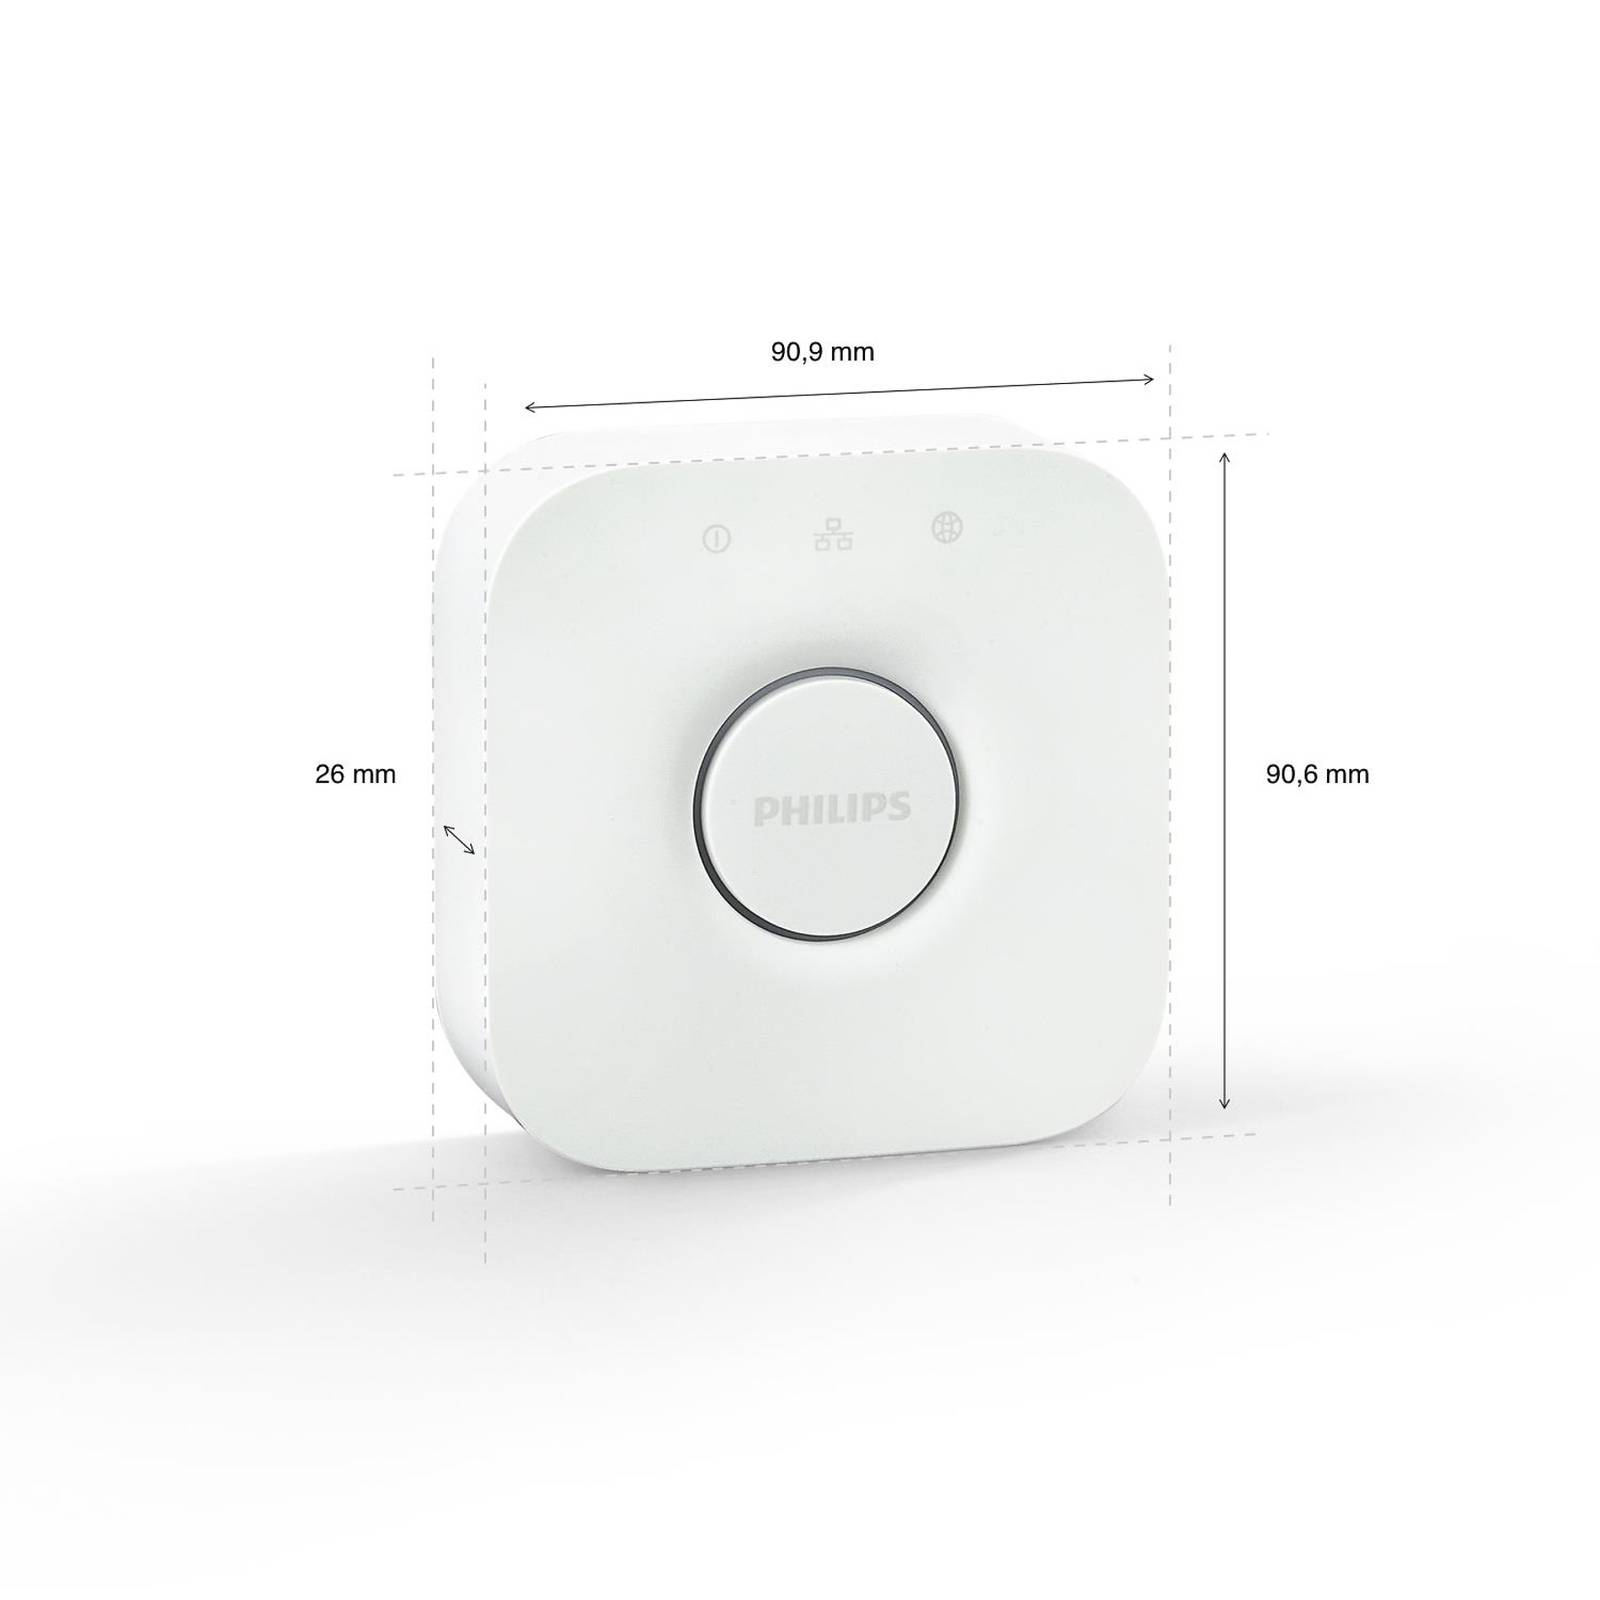 Image of Philips Hue passerelle 8718696511800